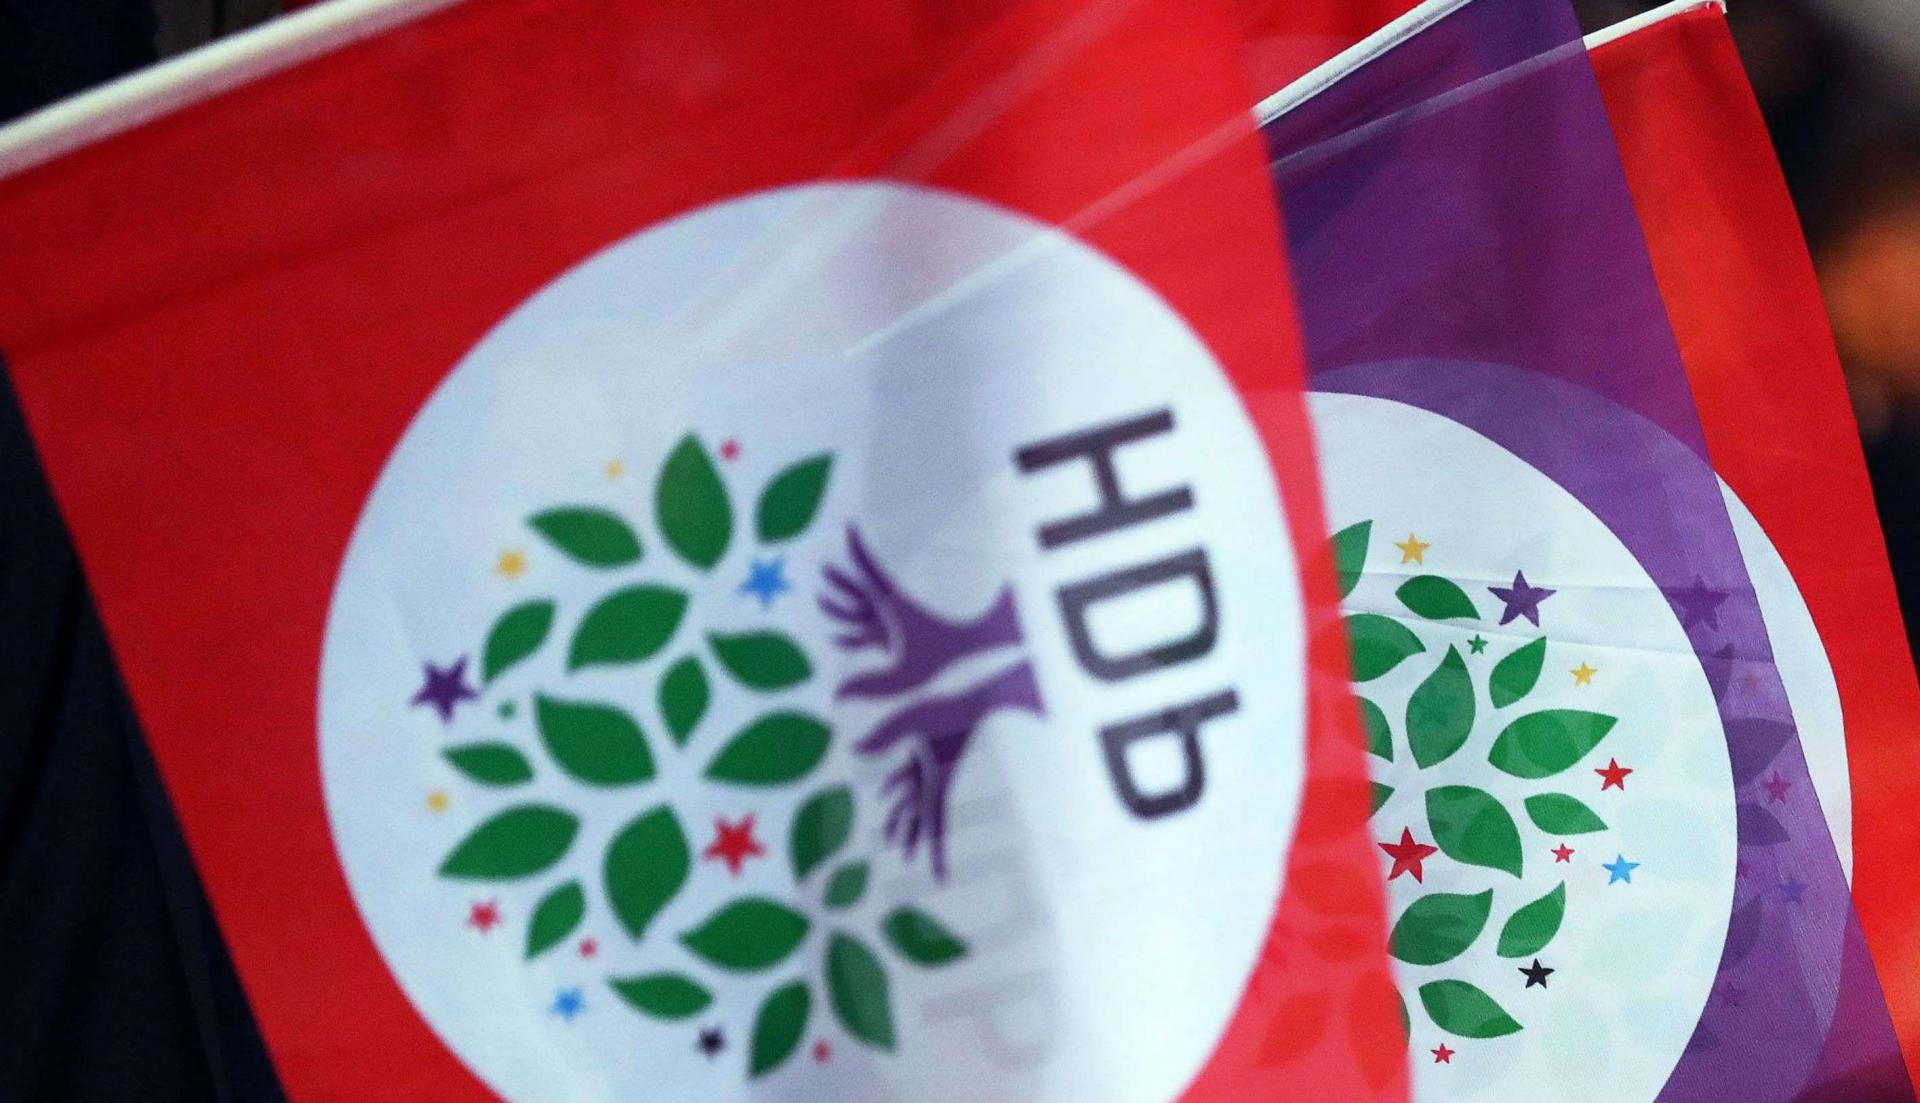 The HDP is Turkey's third largest party